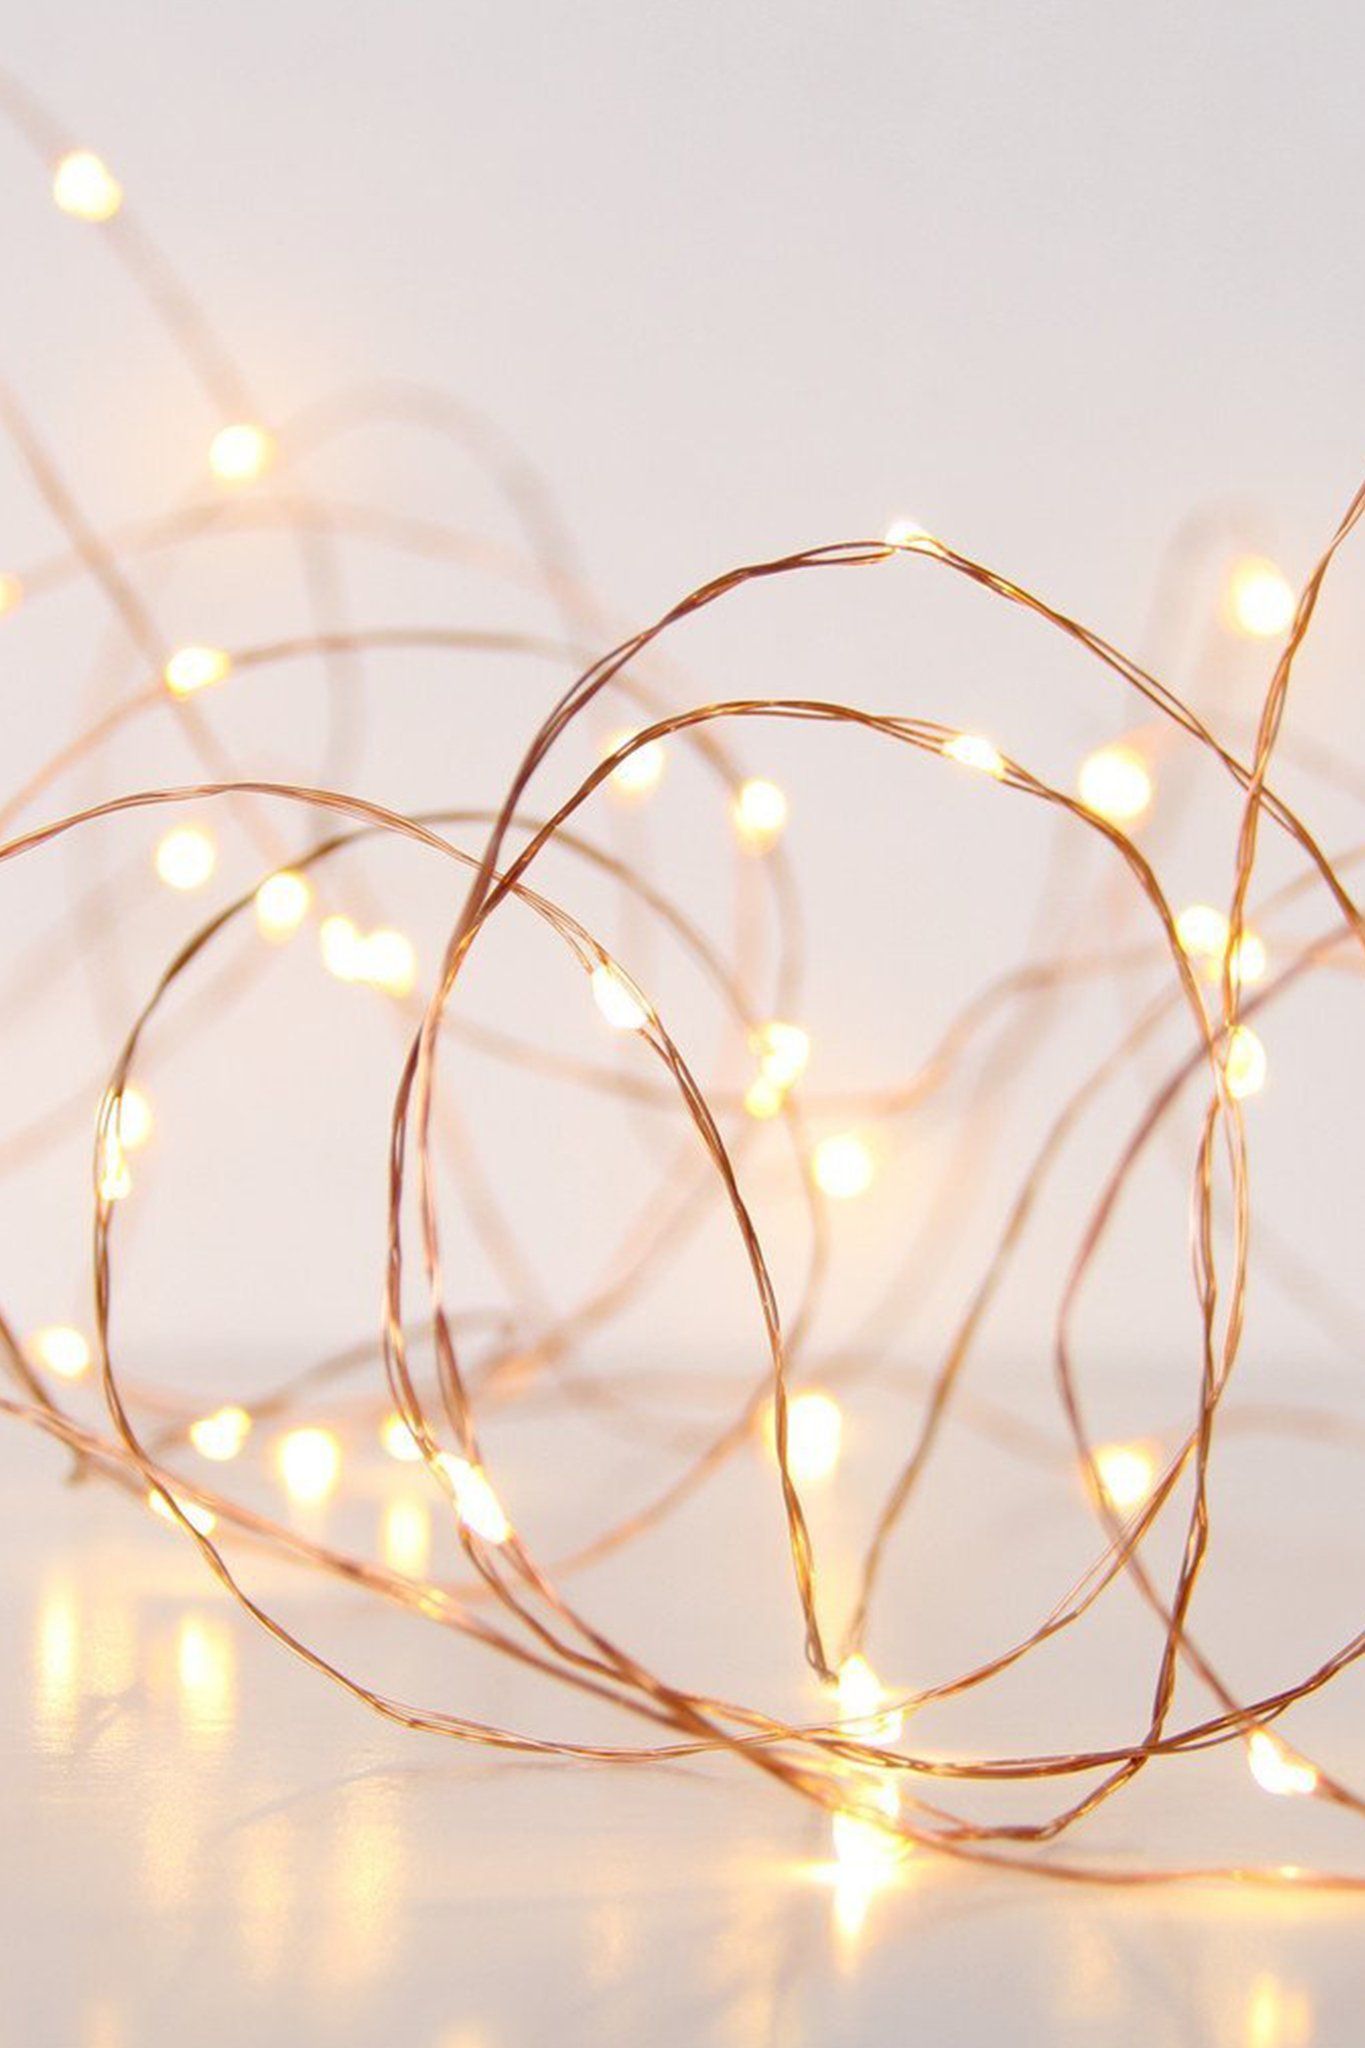 Our delicate Fairy String Lights features warm white LEDs on an